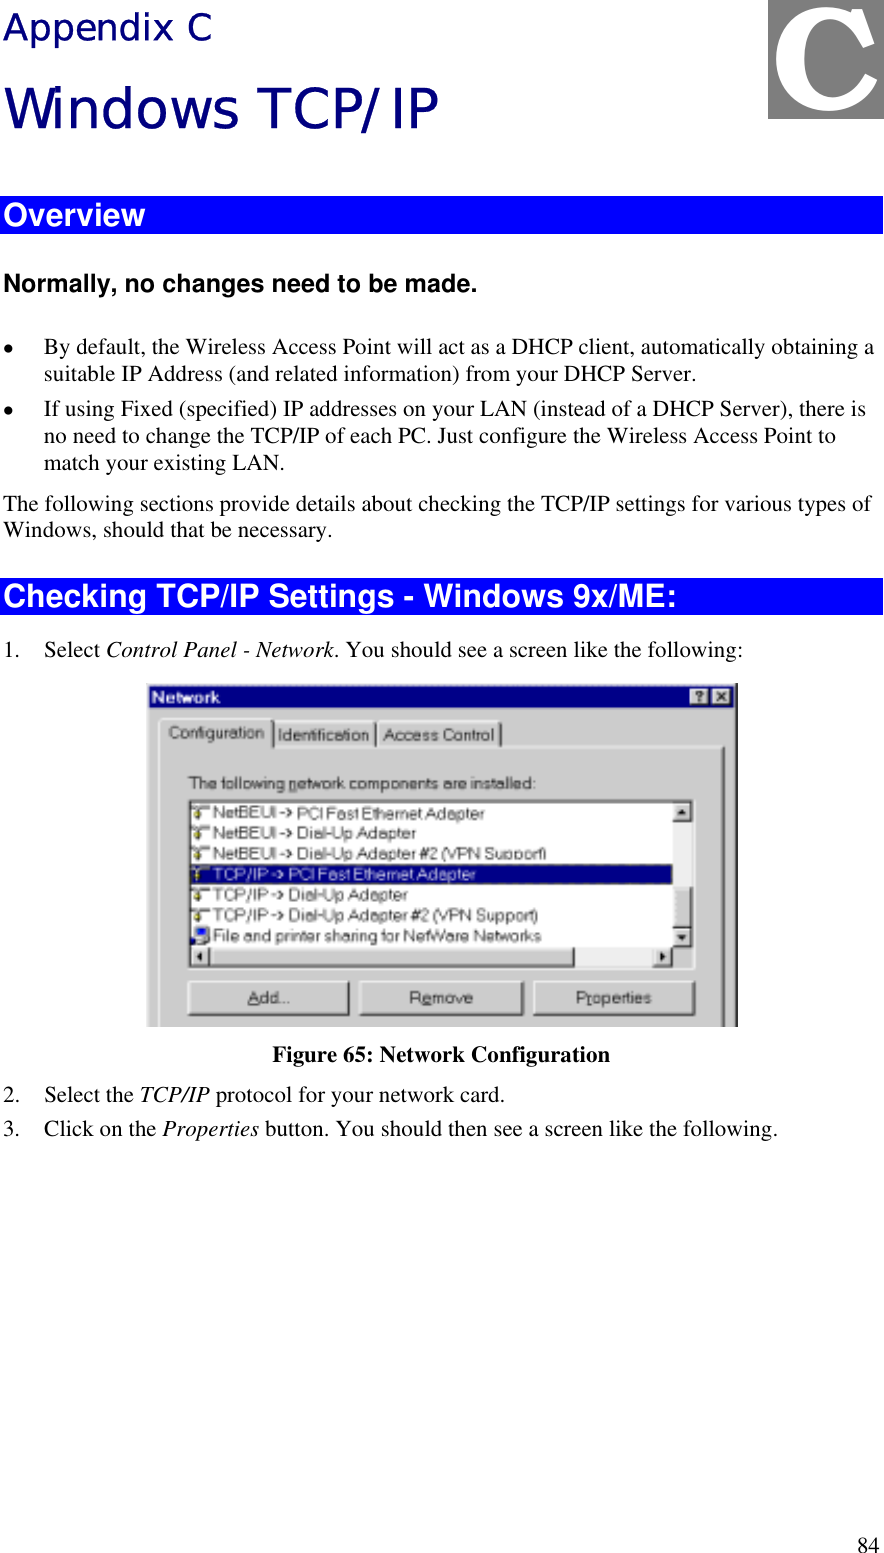  84 Appendix C Windows TCP/IP Overview Normally, no changes need to be made.  •  By default, the Wireless Access Point will act as a DHCP client, automatically obtaining a suitable IP Address (and related information) from your DHCP Server. •  If using Fixed (specified) IP addresses on your LAN (instead of a DHCP Server), there is no need to change the TCP/IP of each PC. Just configure the Wireless Access Point to match your existing LAN. The following sections provide details about checking the TCP/IP settings for various types of Windows, should that be necessary. Checking TCP/IP Settings - Windows 9x/ME: 1. Select Control Panel - Network. You should see a screen like the following:  Figure 65: Network Configuration 2. Select the TCP/IP protocol for your network card. 3.  Click on the Properties button. You should then see a screen like the following. C 